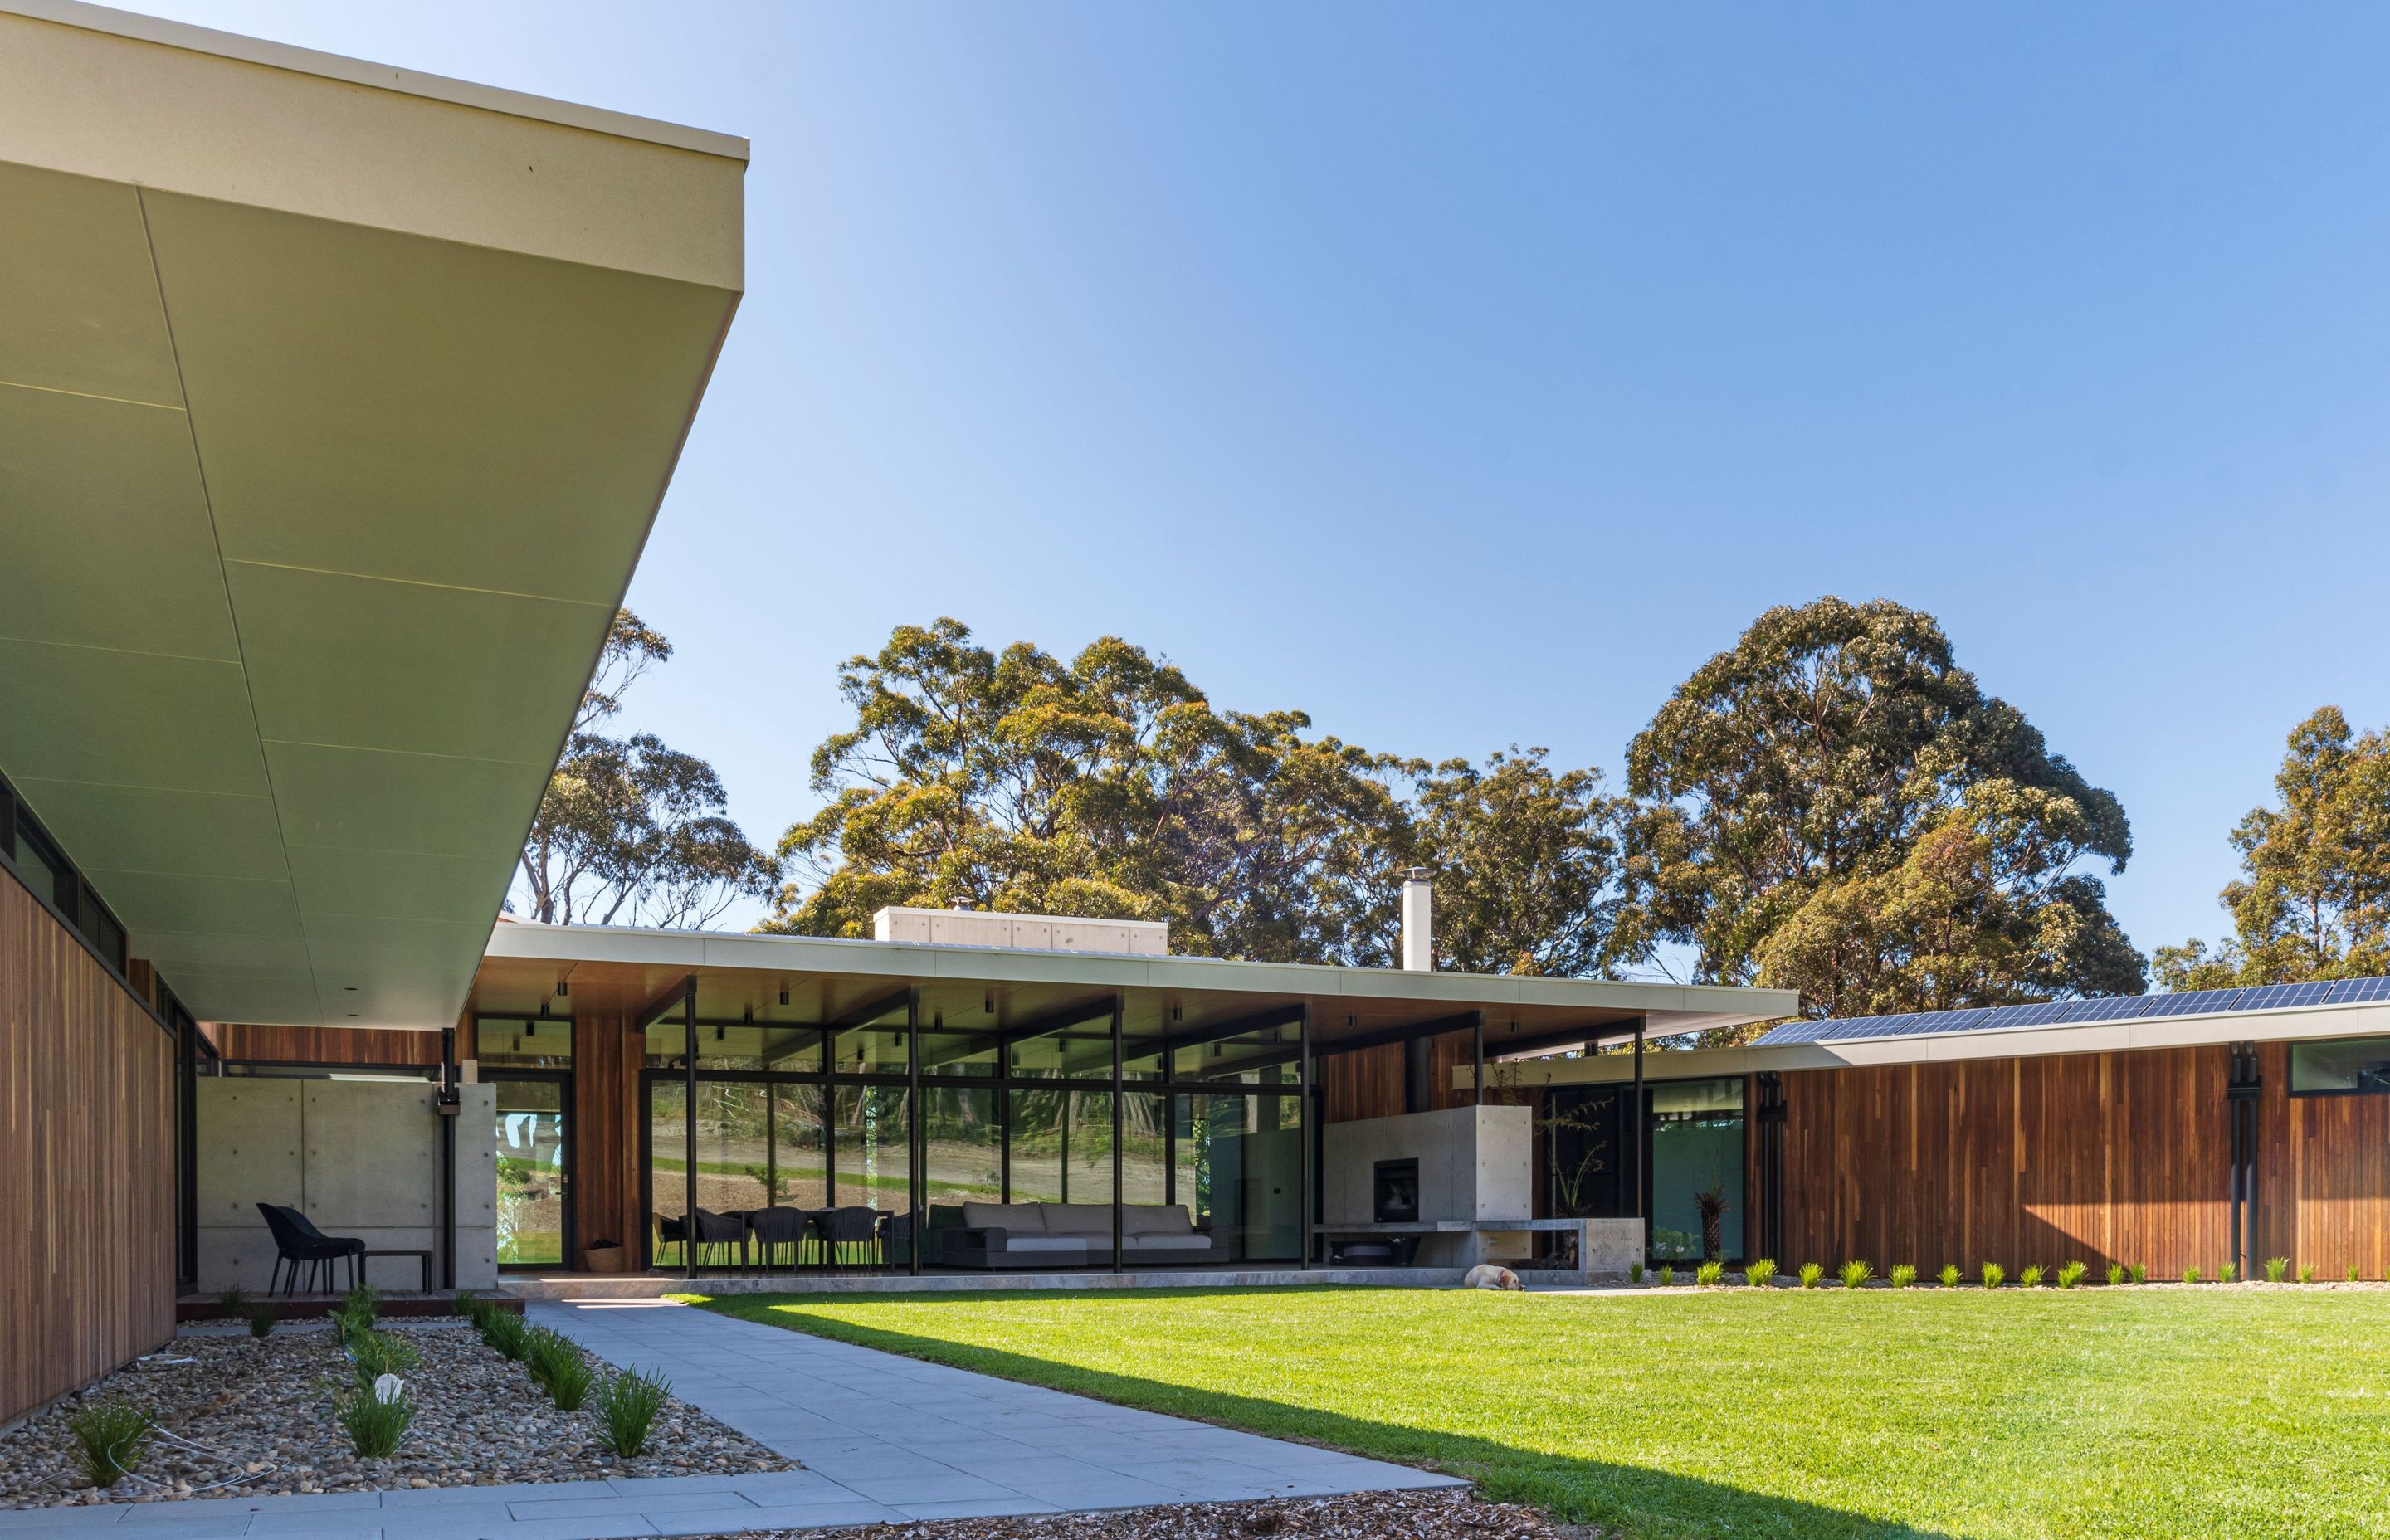 Merimbula House is clad with locally sourced spotted gum on both interior and exterior walls.